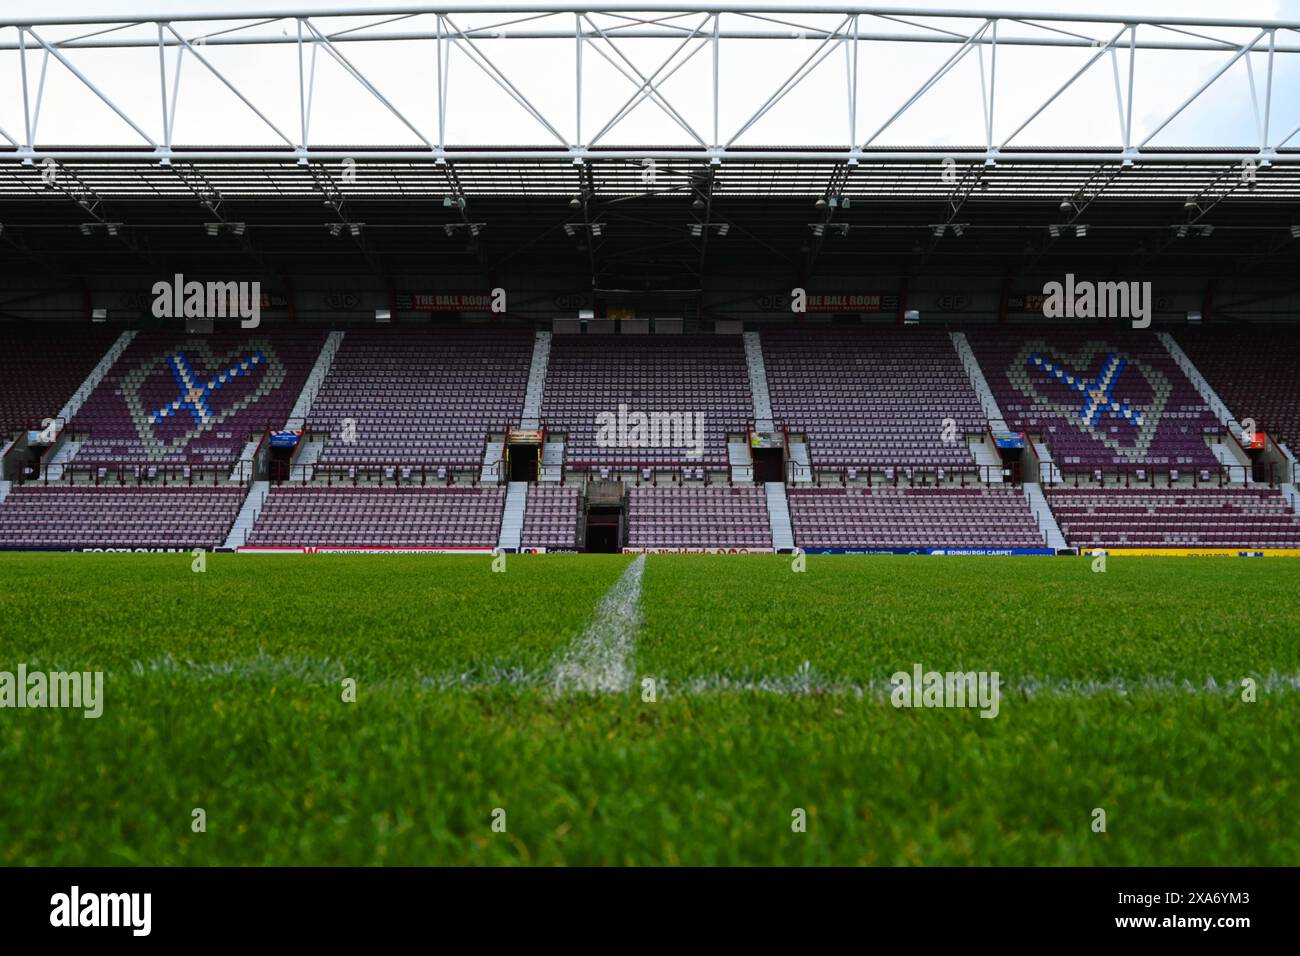 A deserted soccer stadium with green field, empty seats, and a clock above Stock Photo